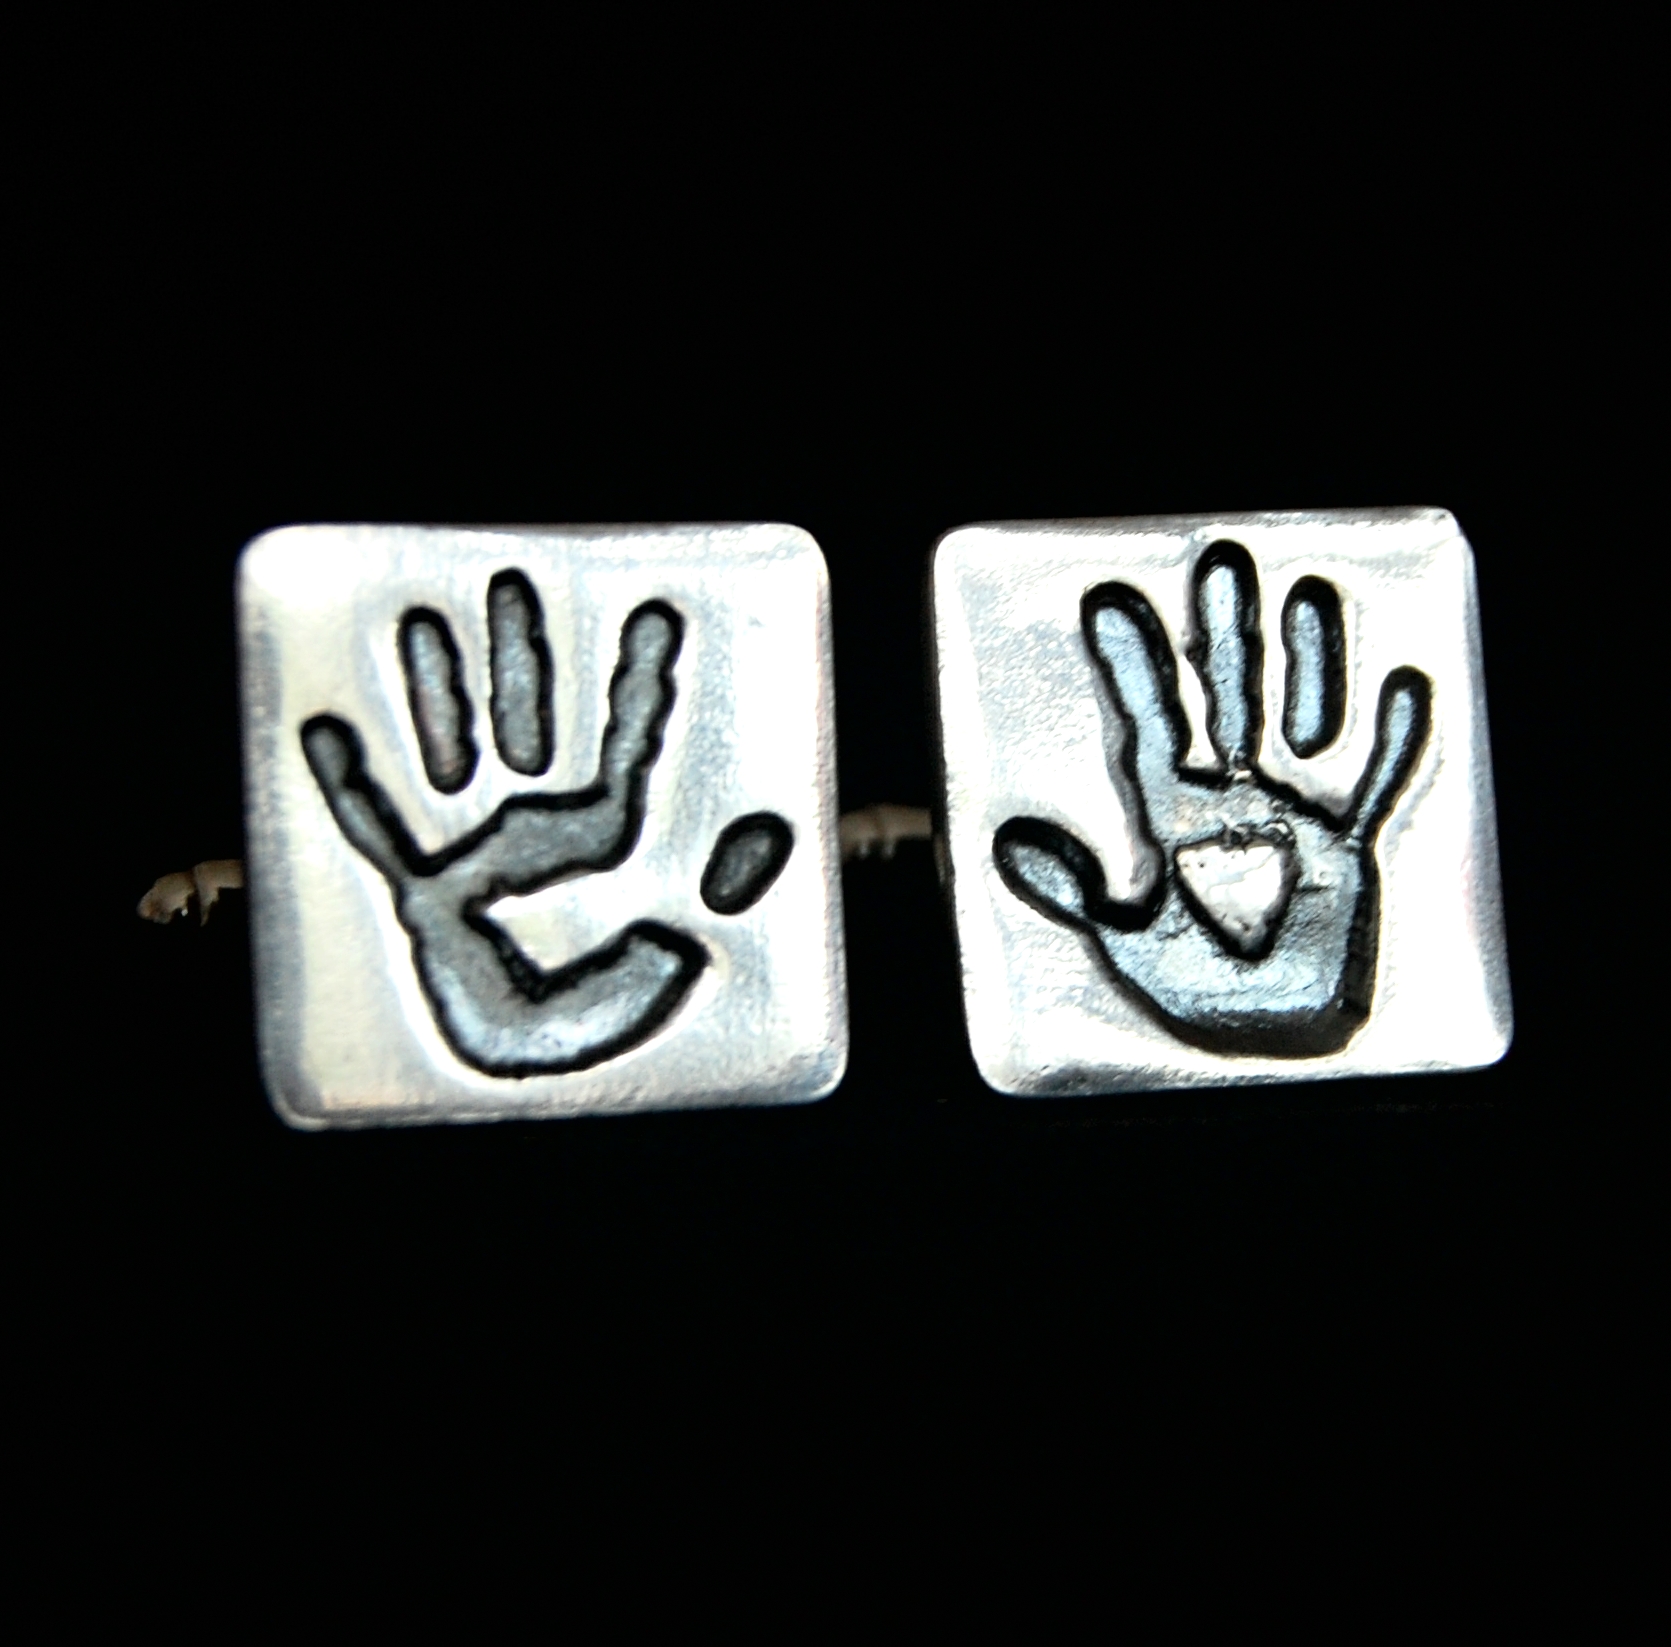 Square silver cufflinks with adult handprints. Name hand inscribed on the back.